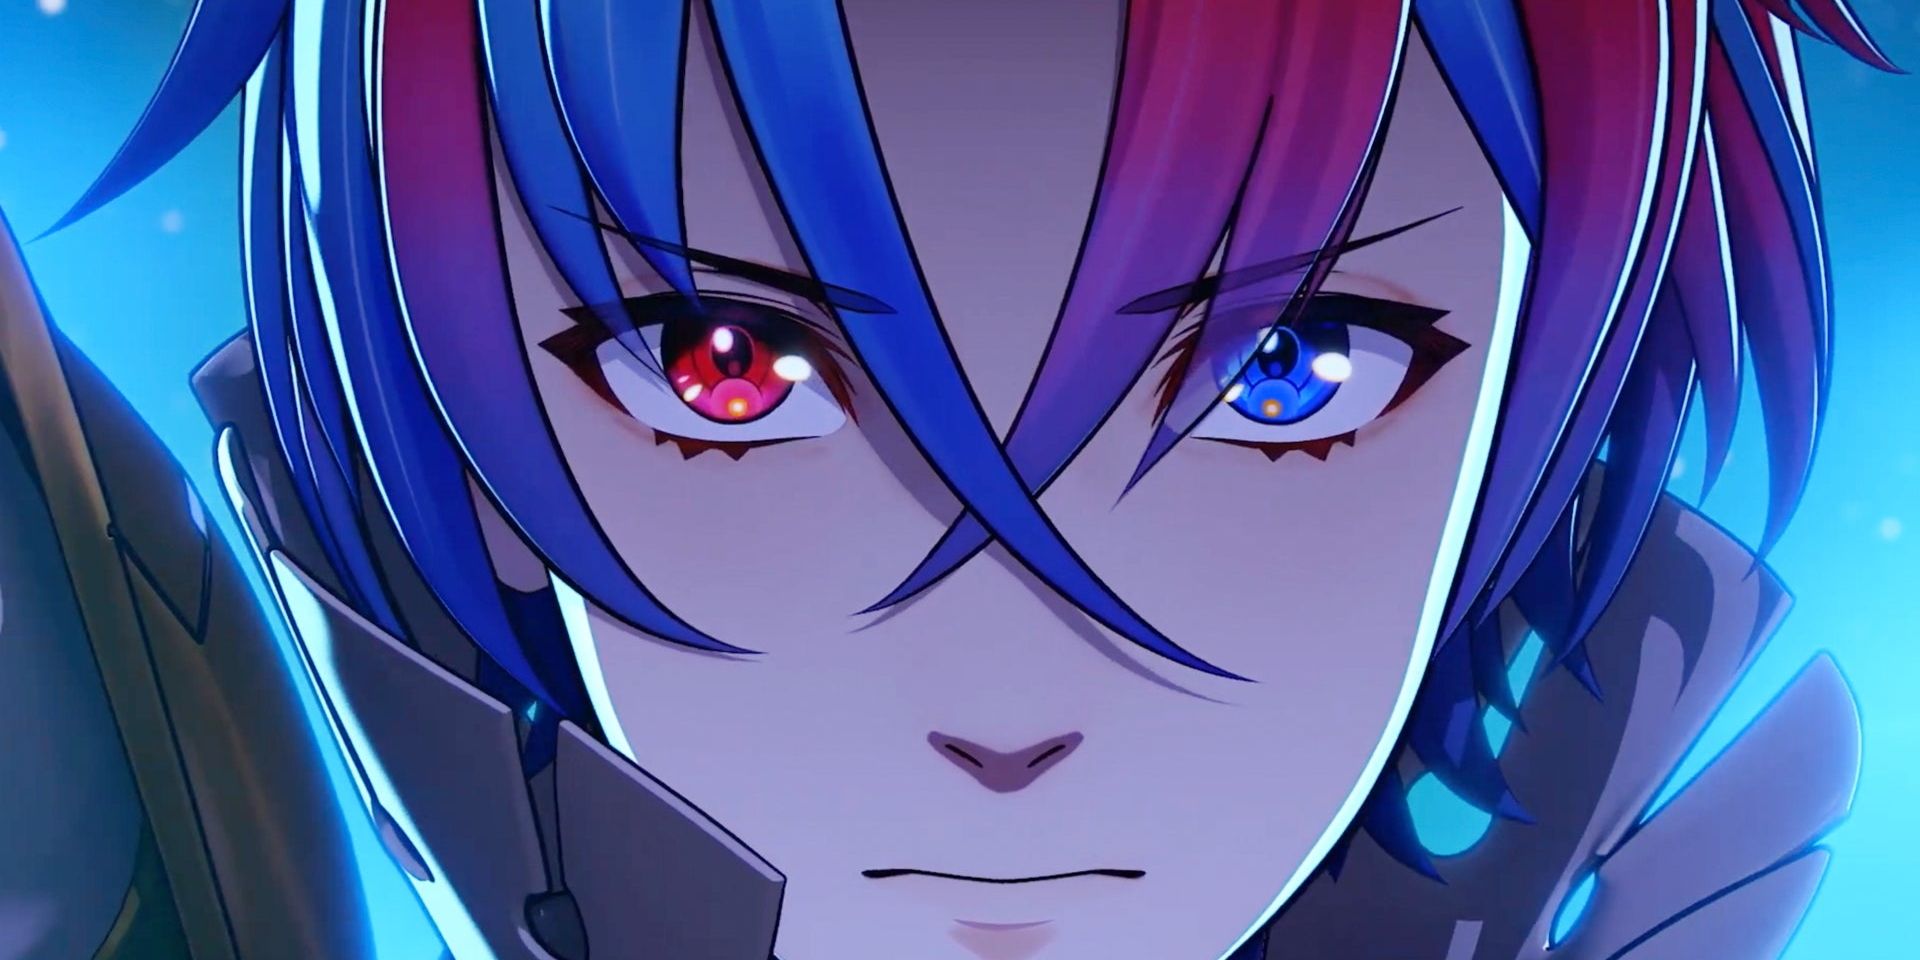 fire emblem engage close up of main character face looking serious